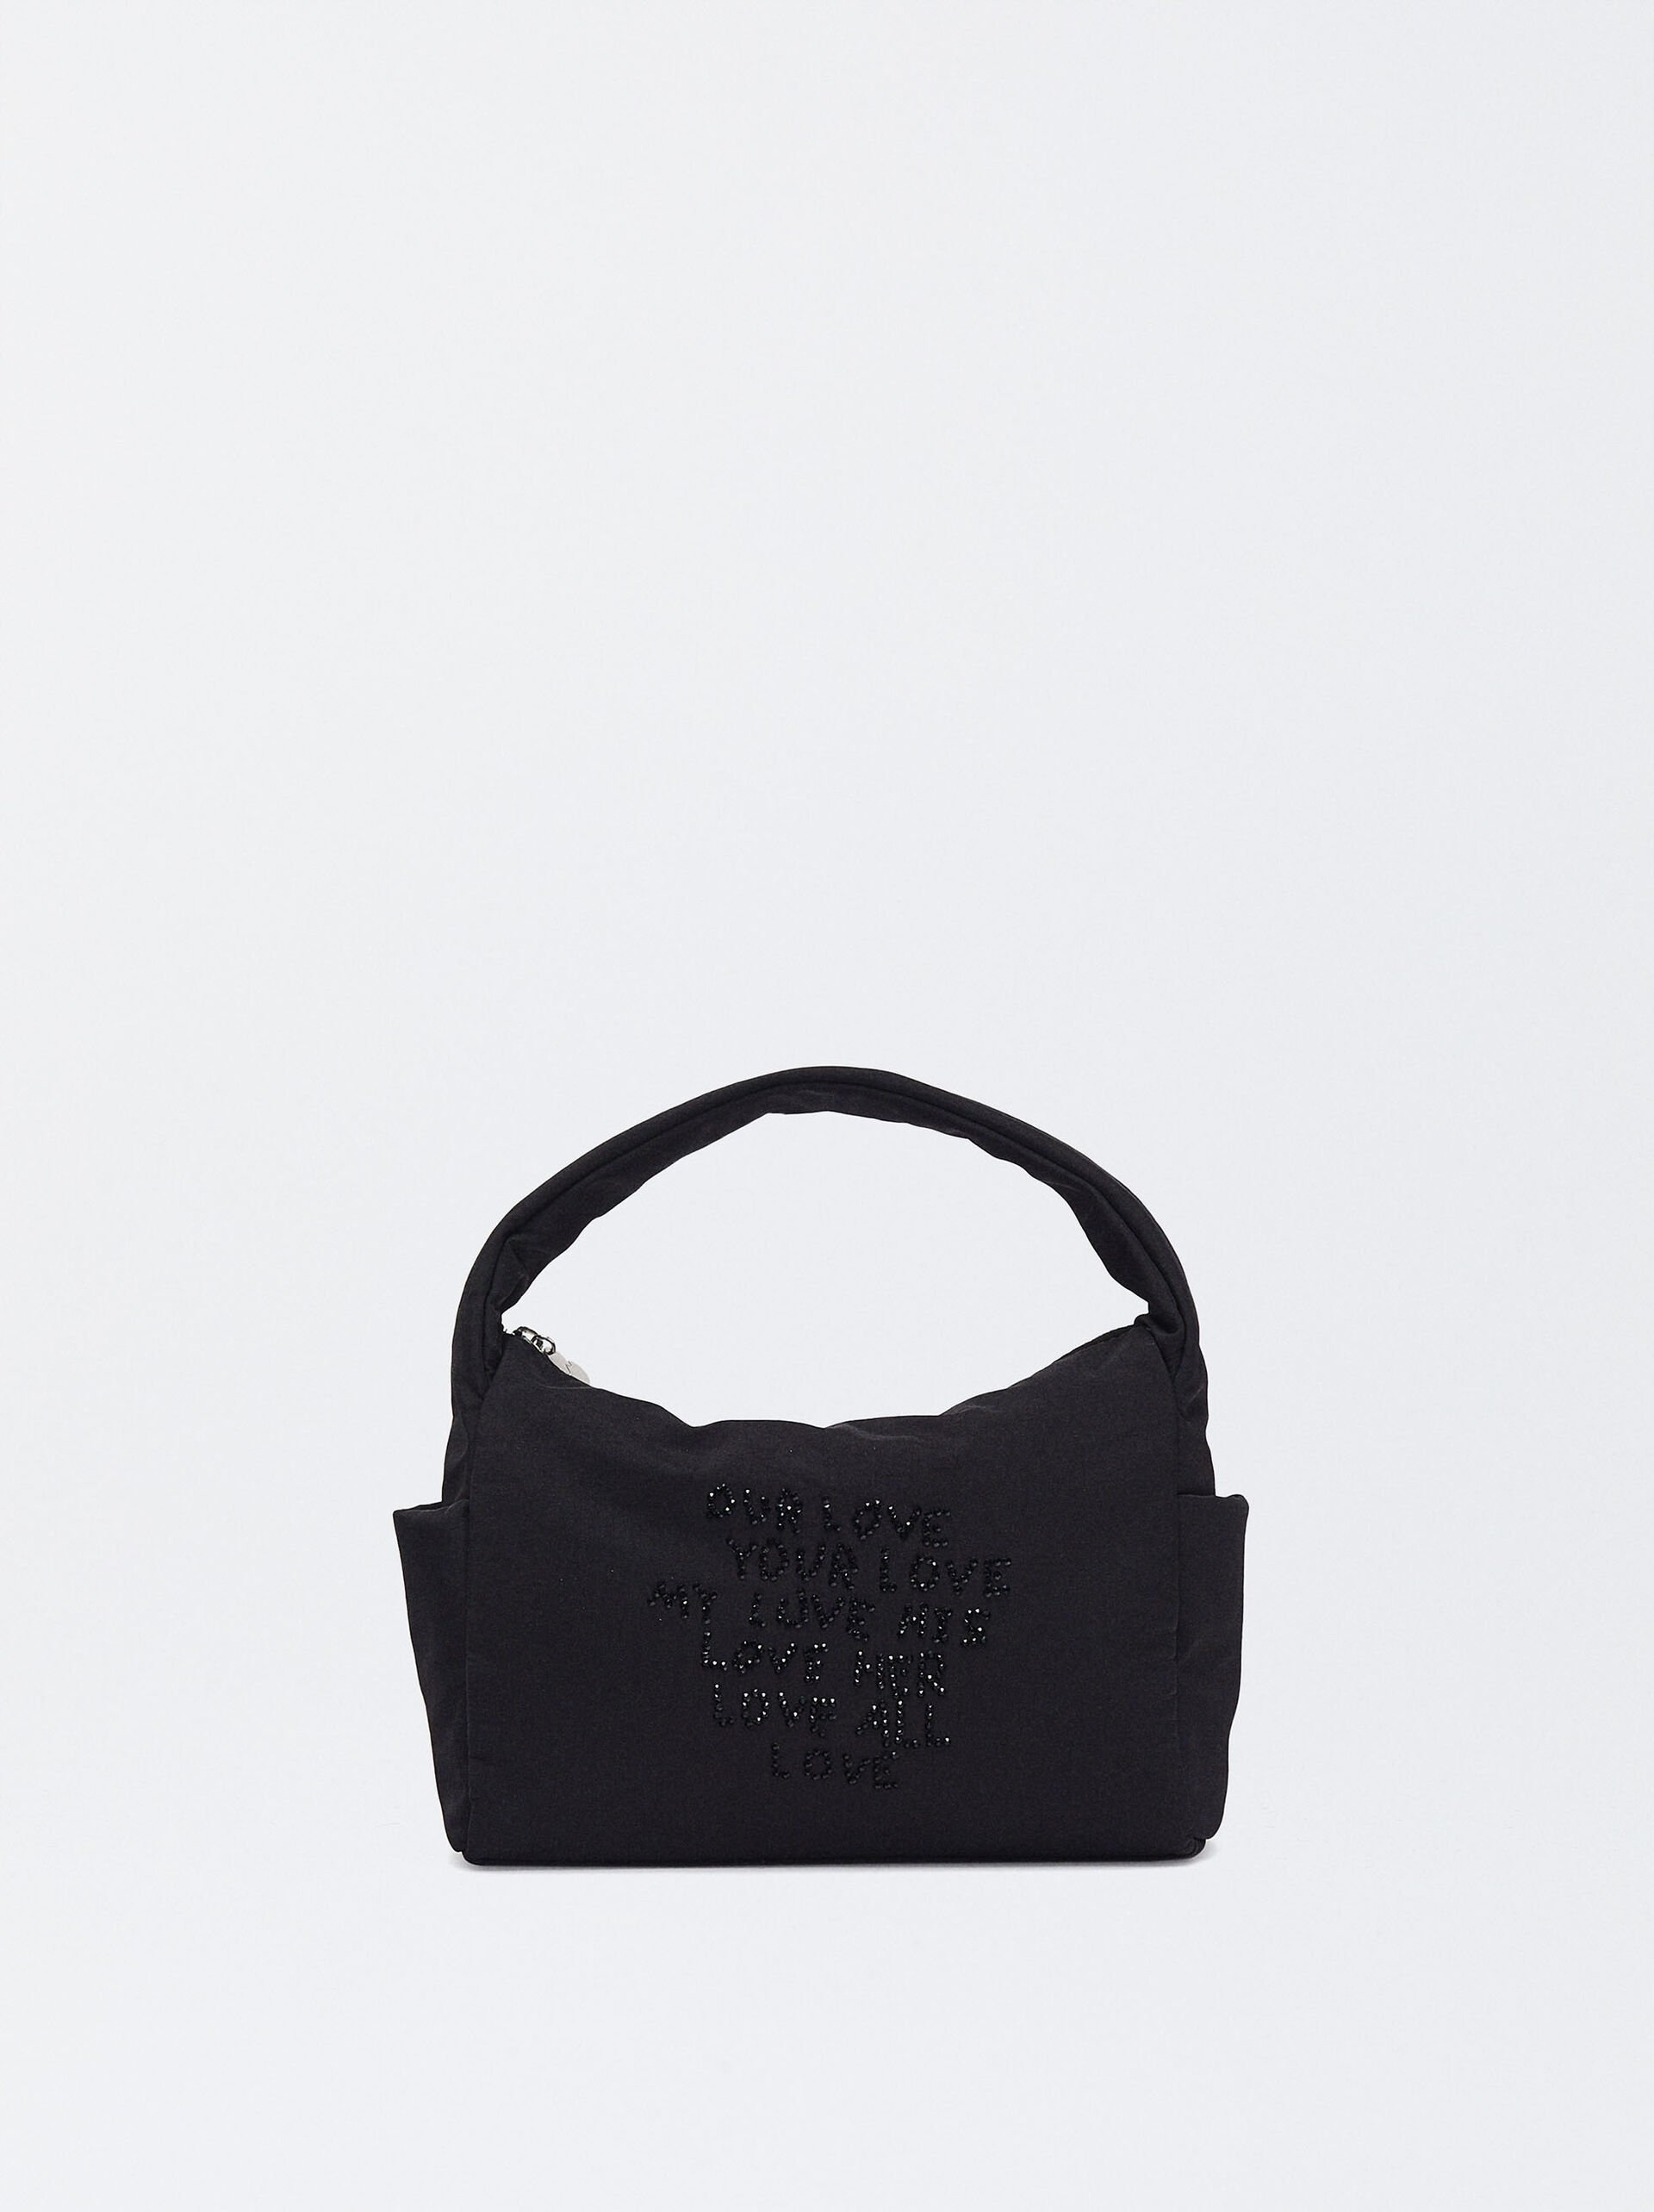 Online Exclusive - Borsa A Spalla In Nylon Love image number 0.0